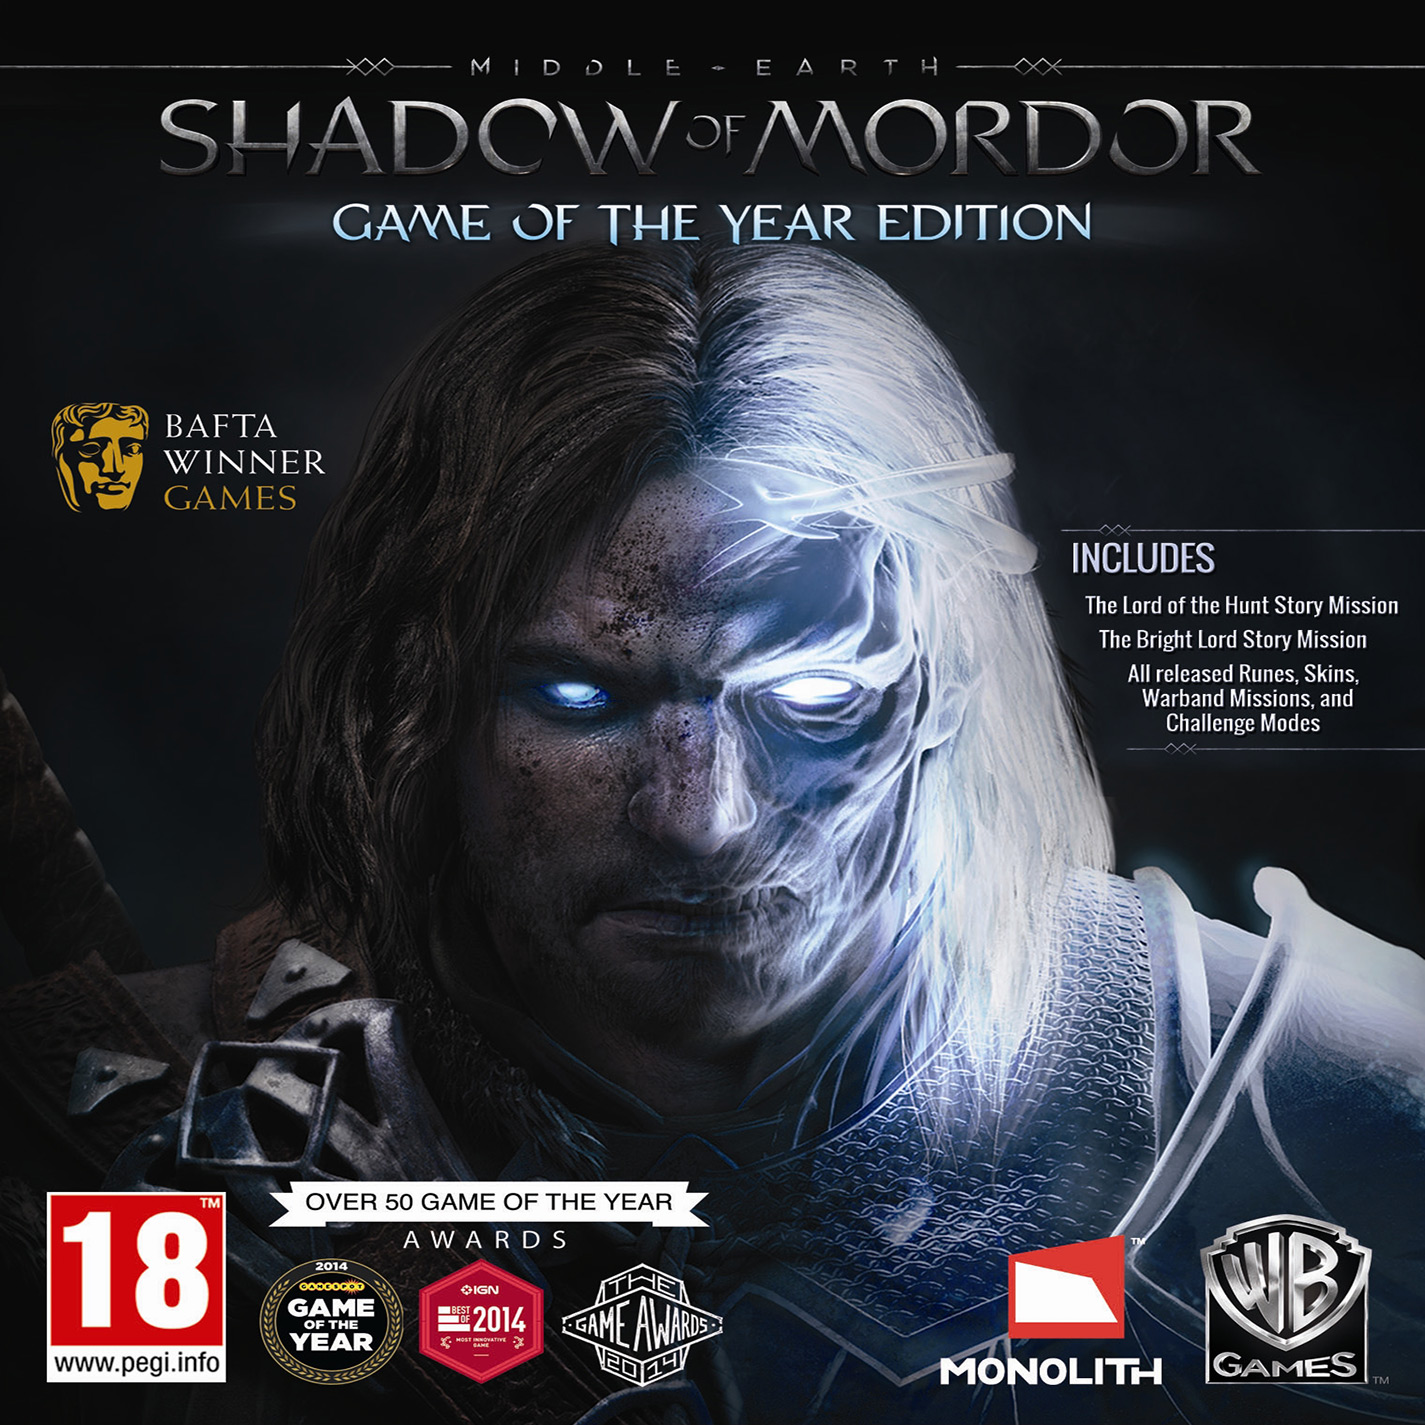 Middle-earth: Shadow of Mordor - Game of the Year Edition - predn CD obal